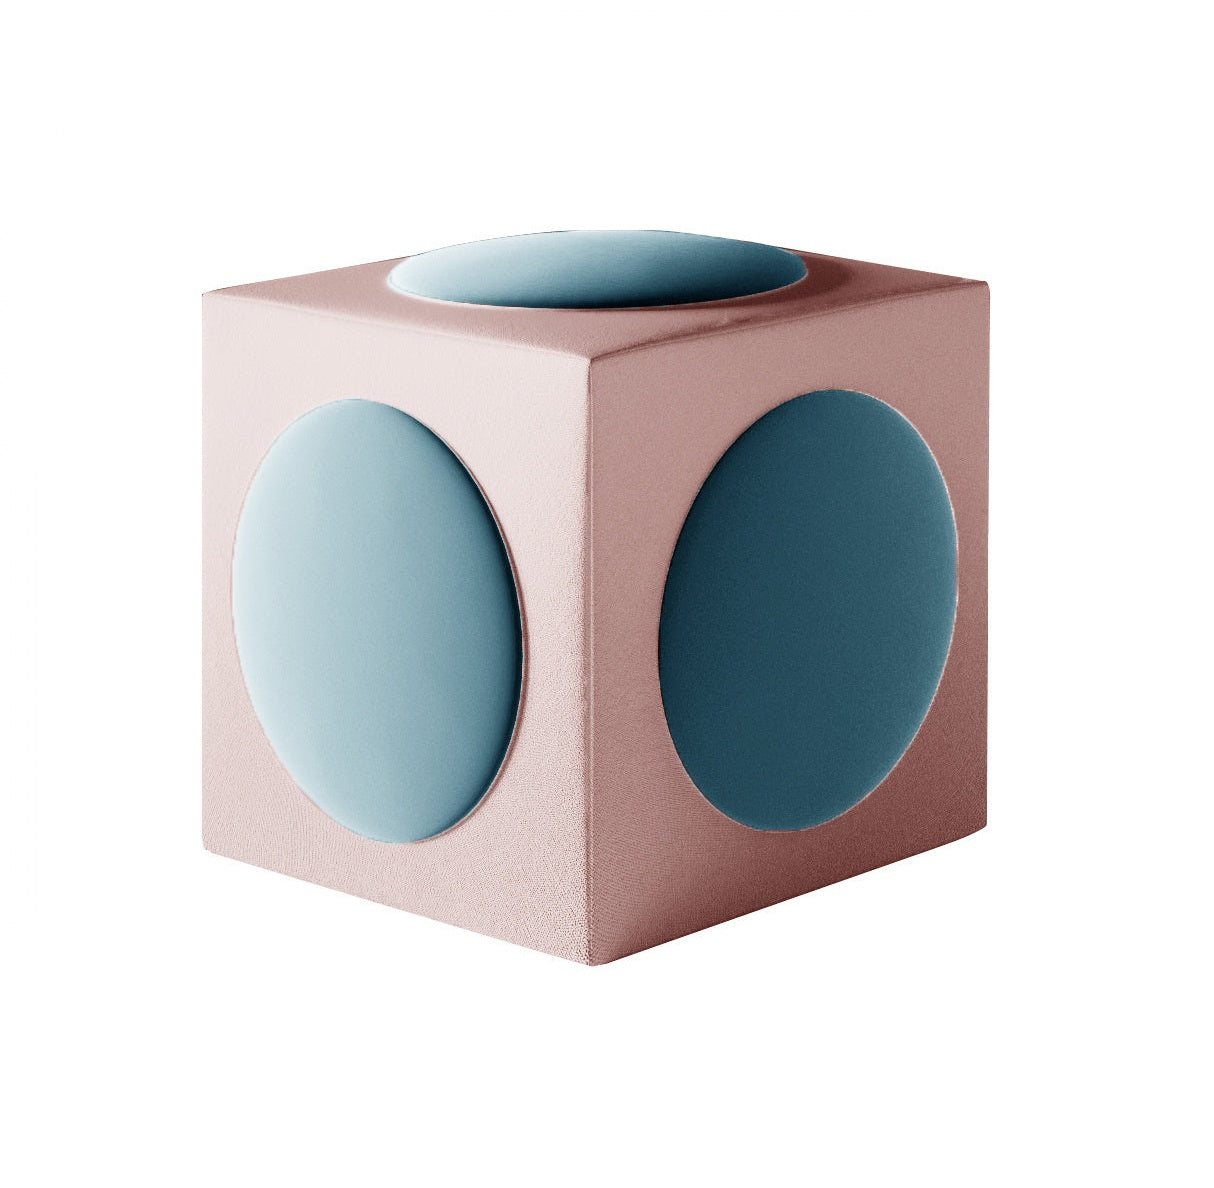 CACKO NO 2 pouffe in blue with pink